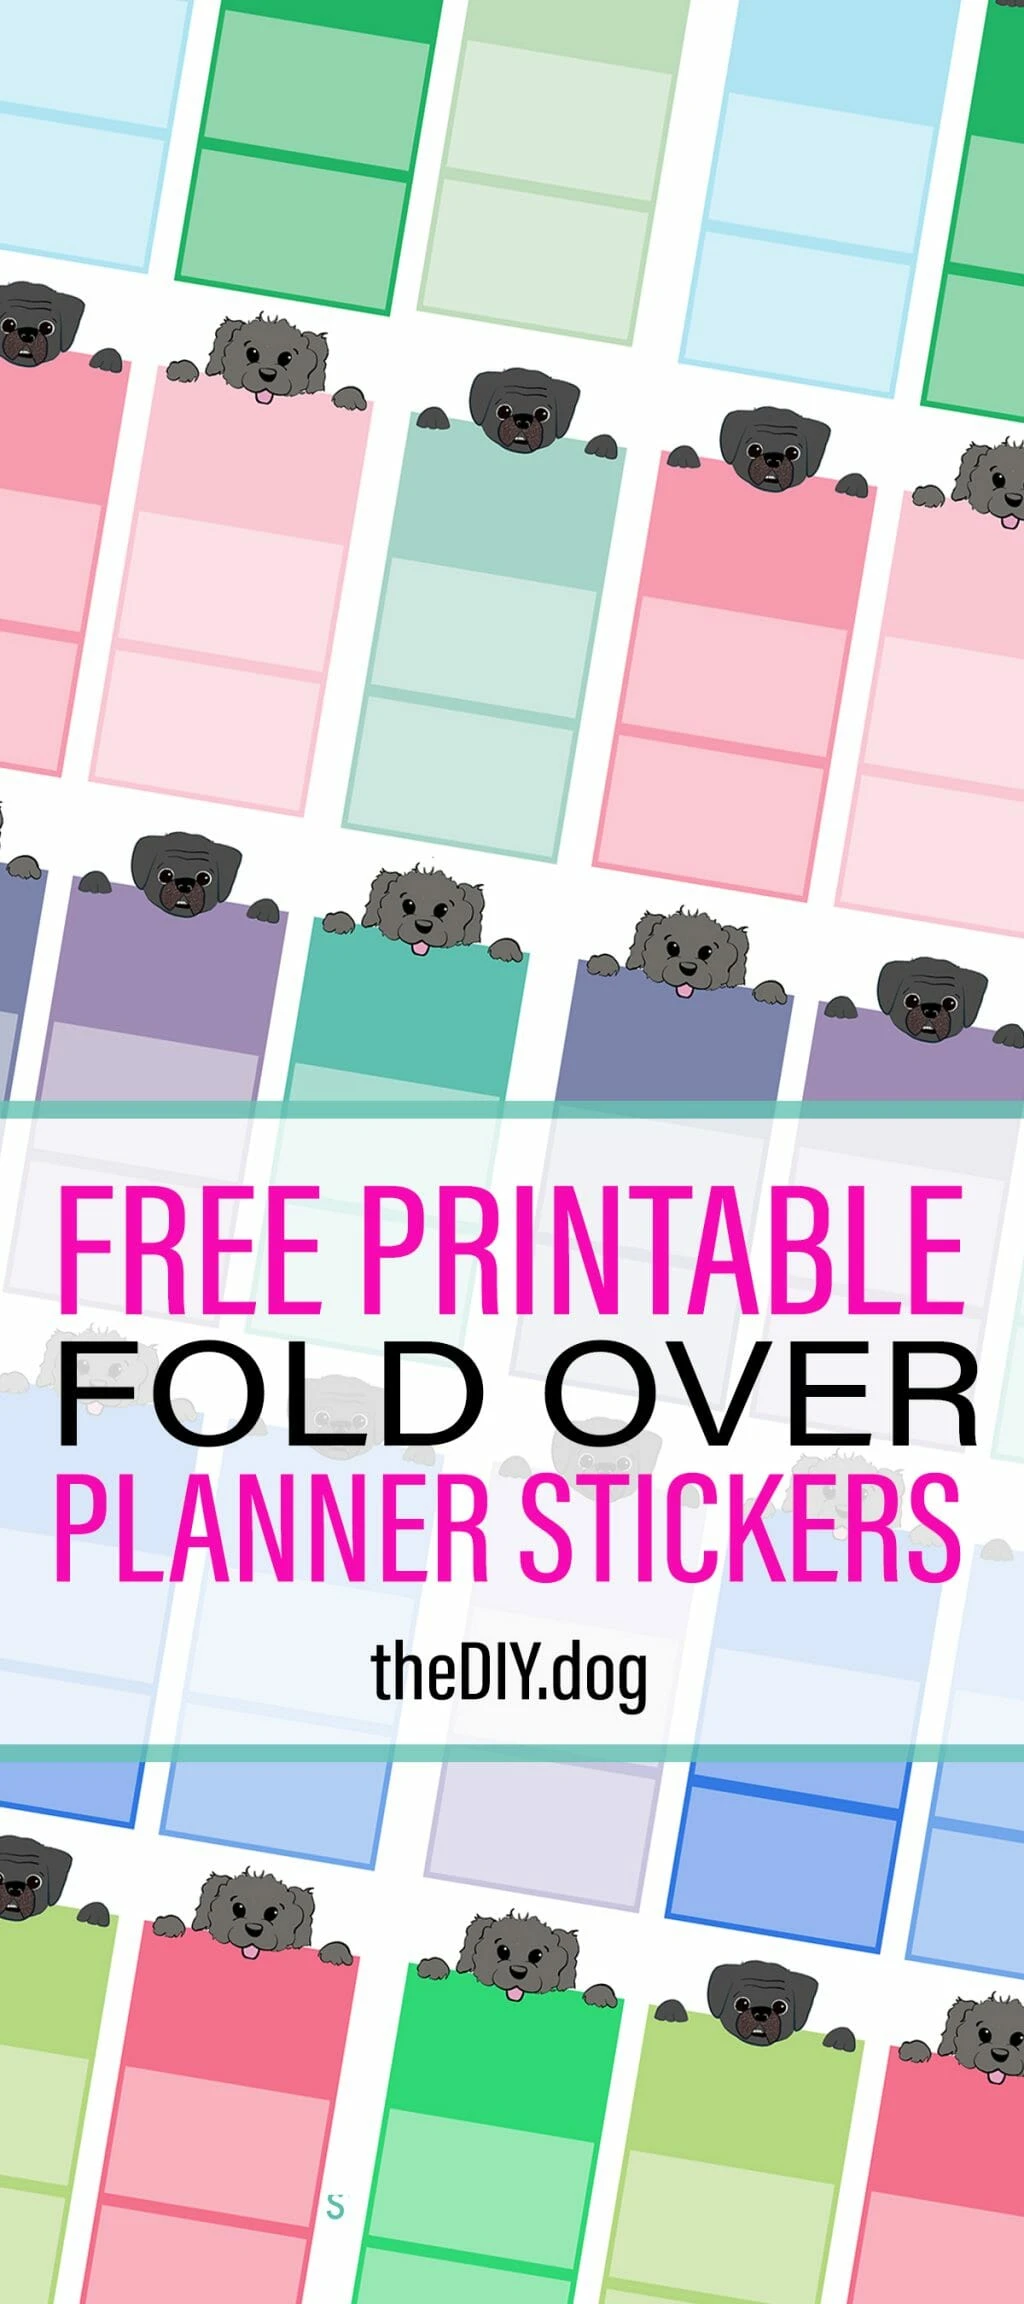 free brightly coloured printable foldable stickers with a black fluffy cartoon dog or a black cartoon puggle dog face peeking over the top of each one. Text says: Free printable foldover planner stickers